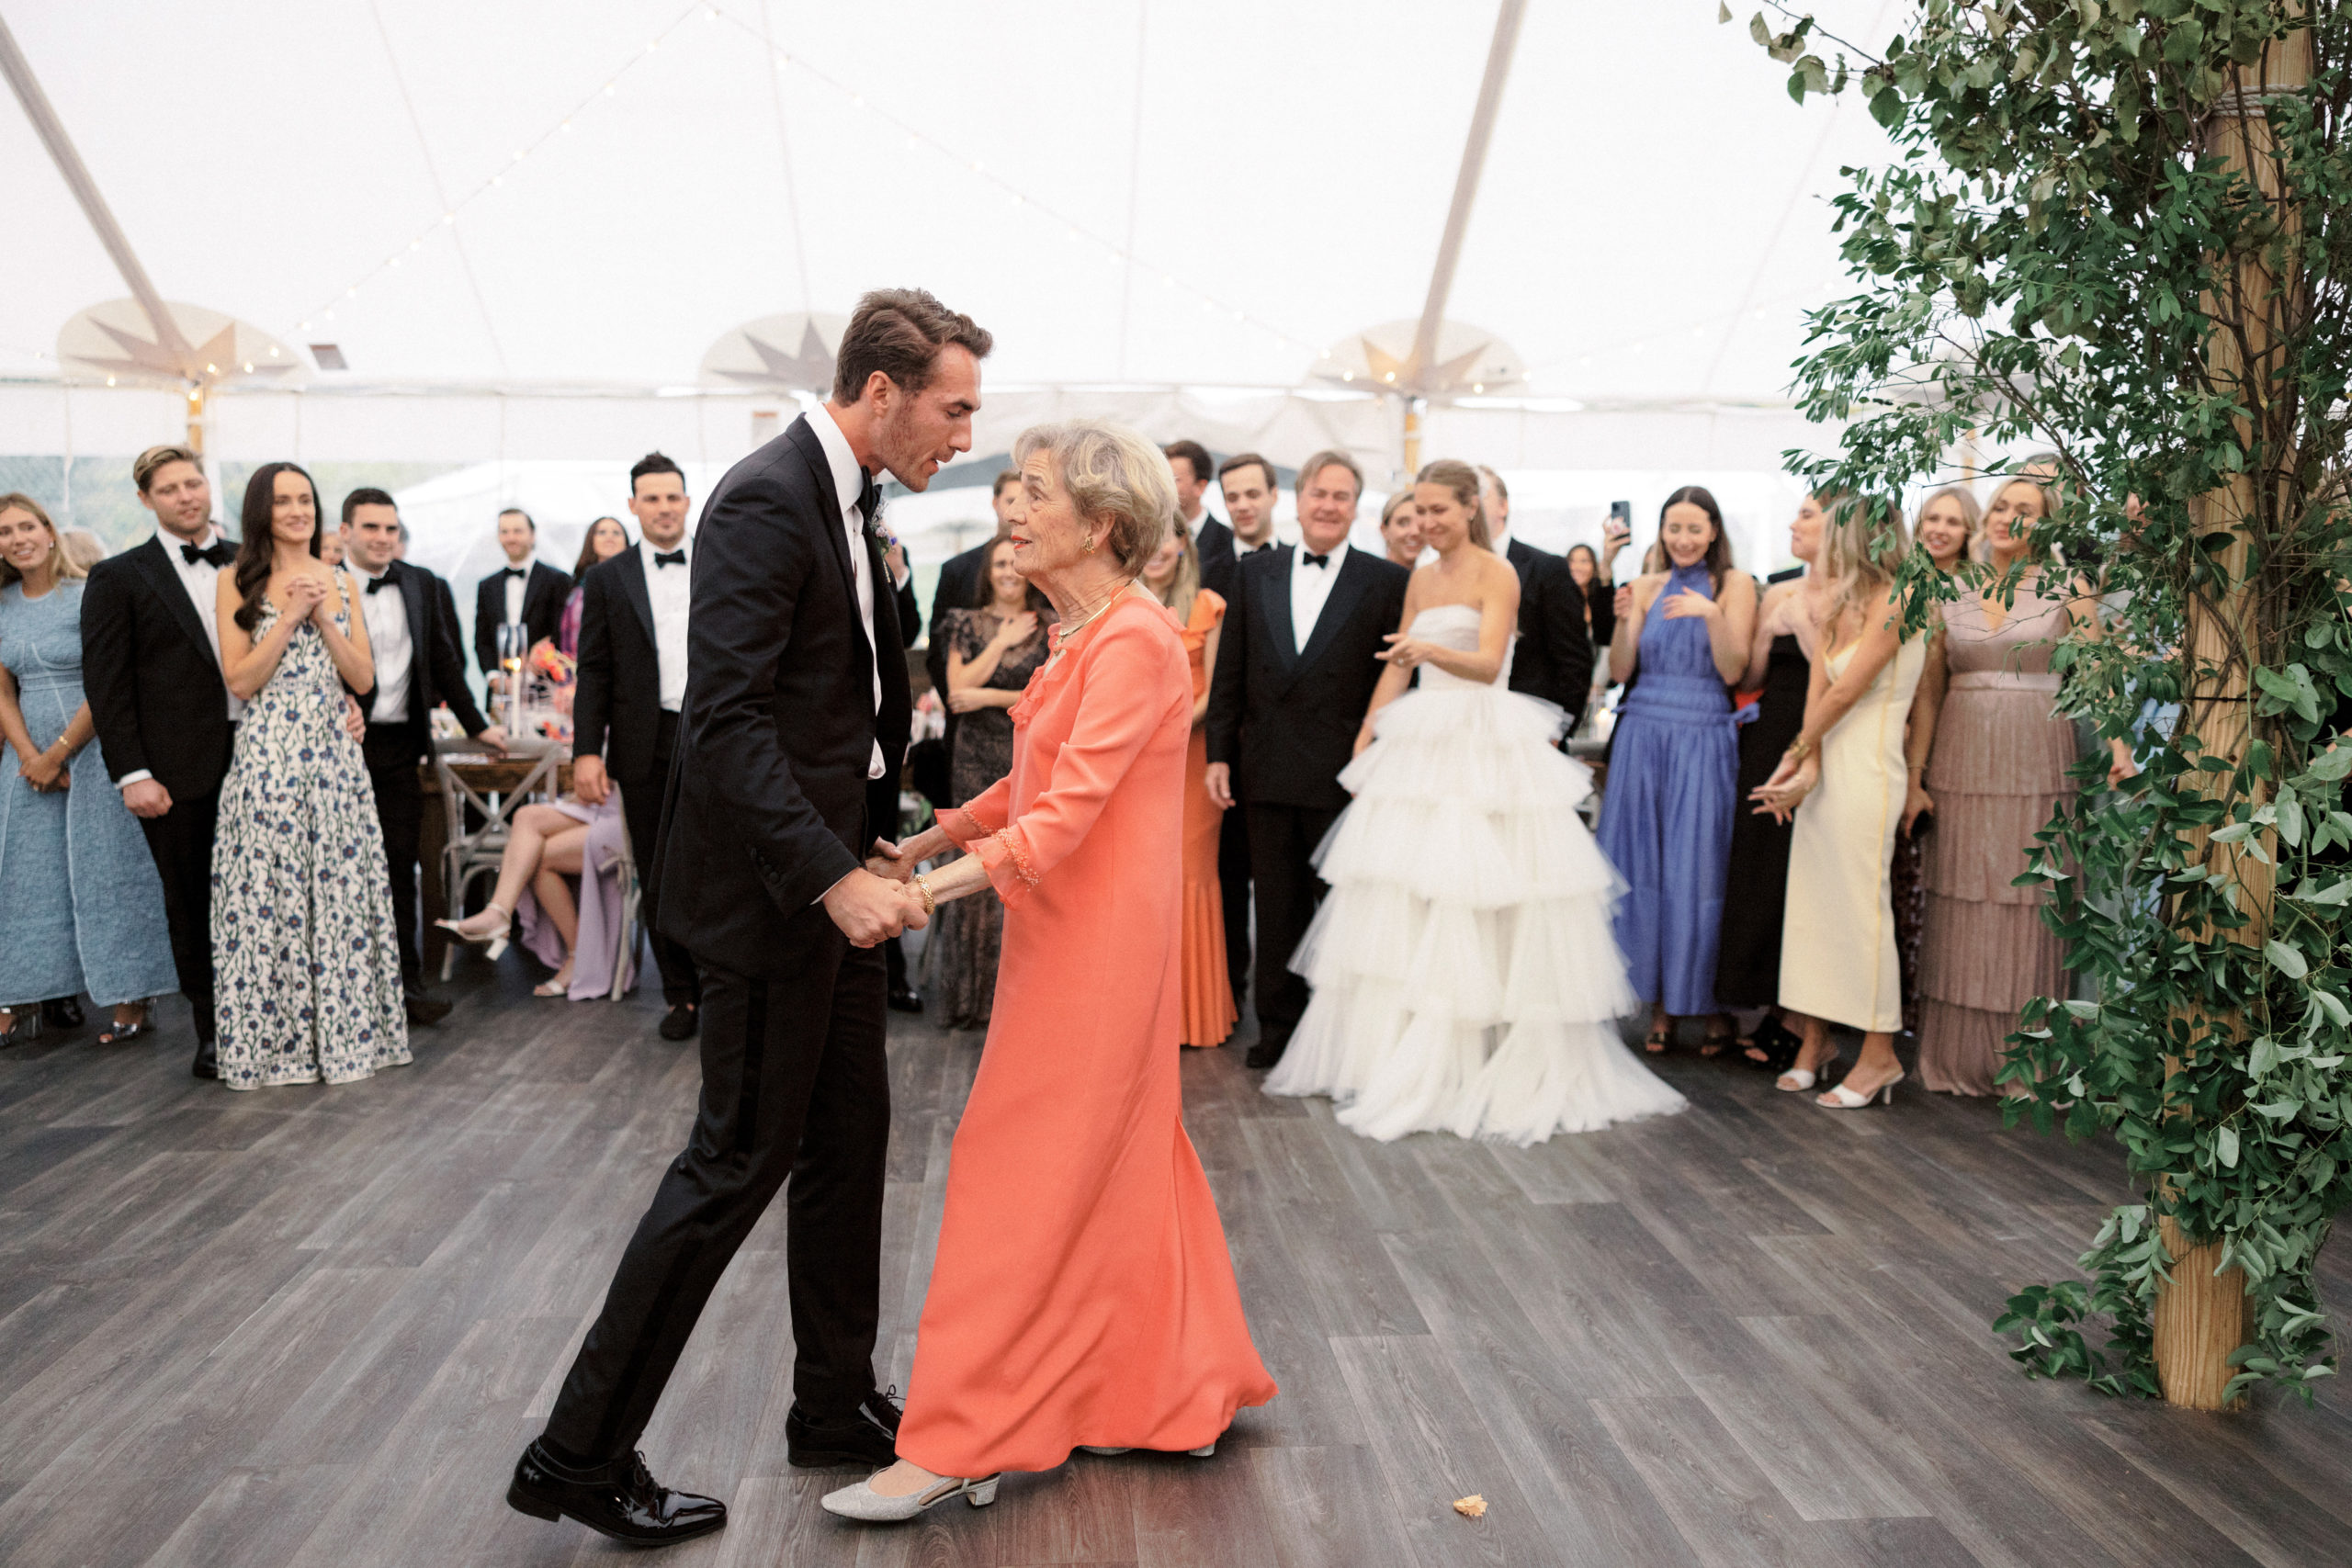 The groom is dancing with his mother. Candid wedding photography image by Jenny Fu Studio